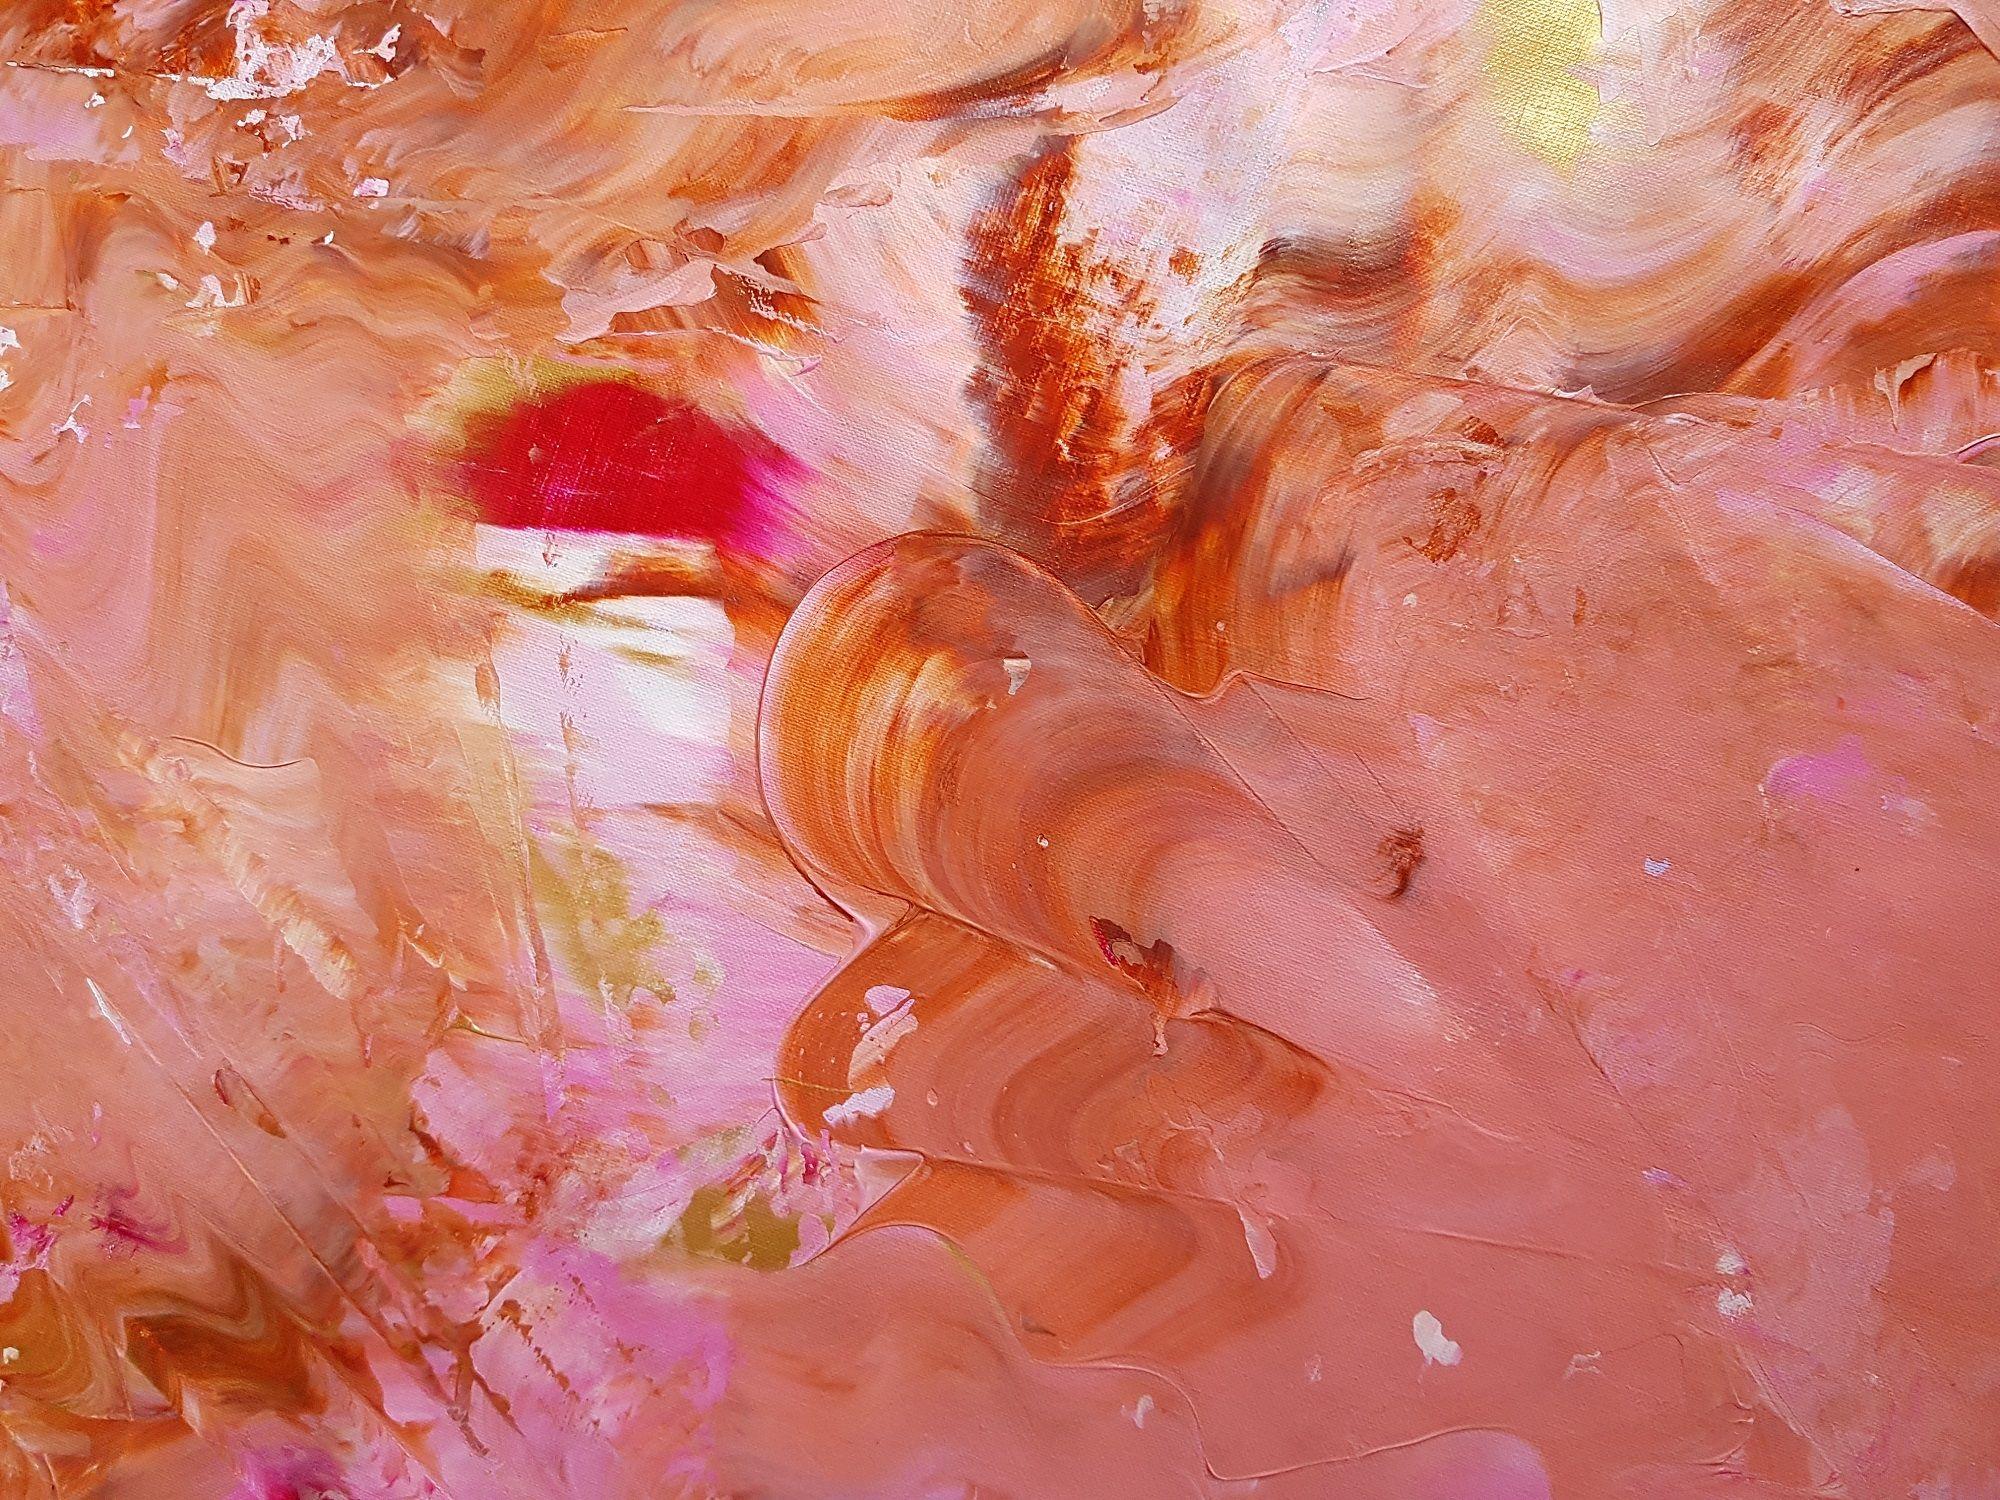 Enter my Soul, Painting, Acrylic on Canvas - Pink Abstract Painting by Ivana Olbricht